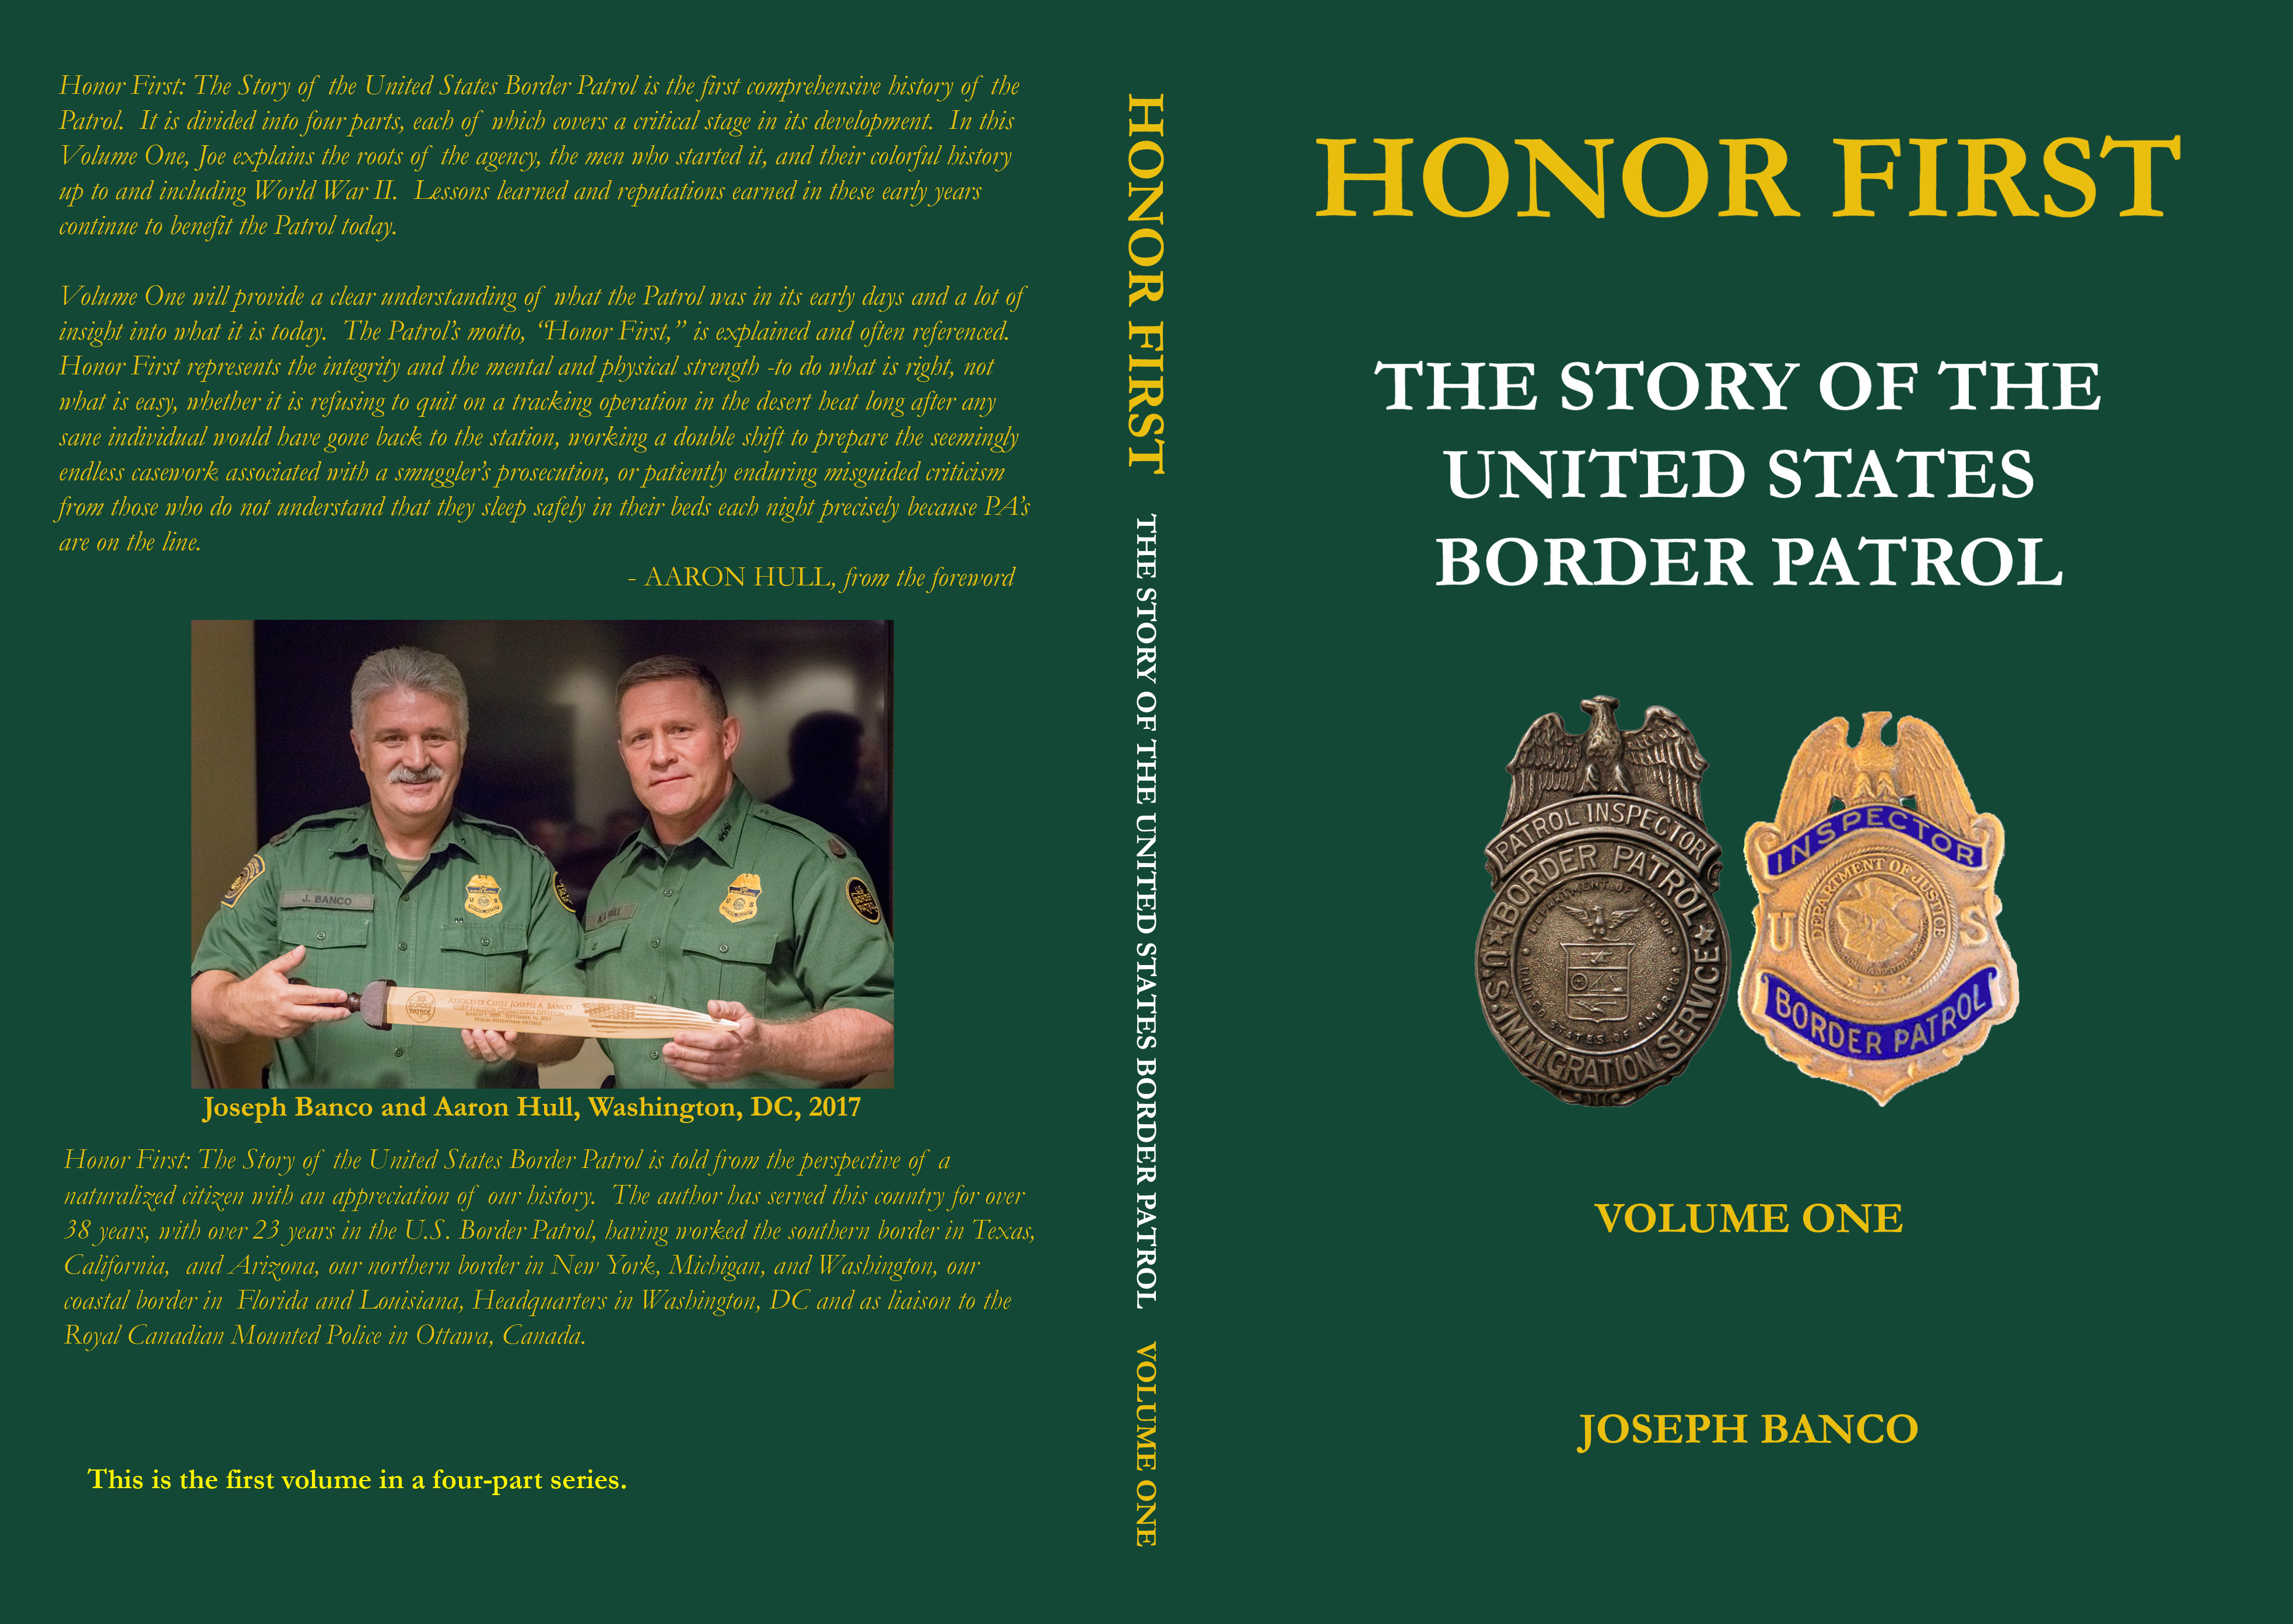 COVER -  HONOR FIRST: The Story of The United States Border Patrol